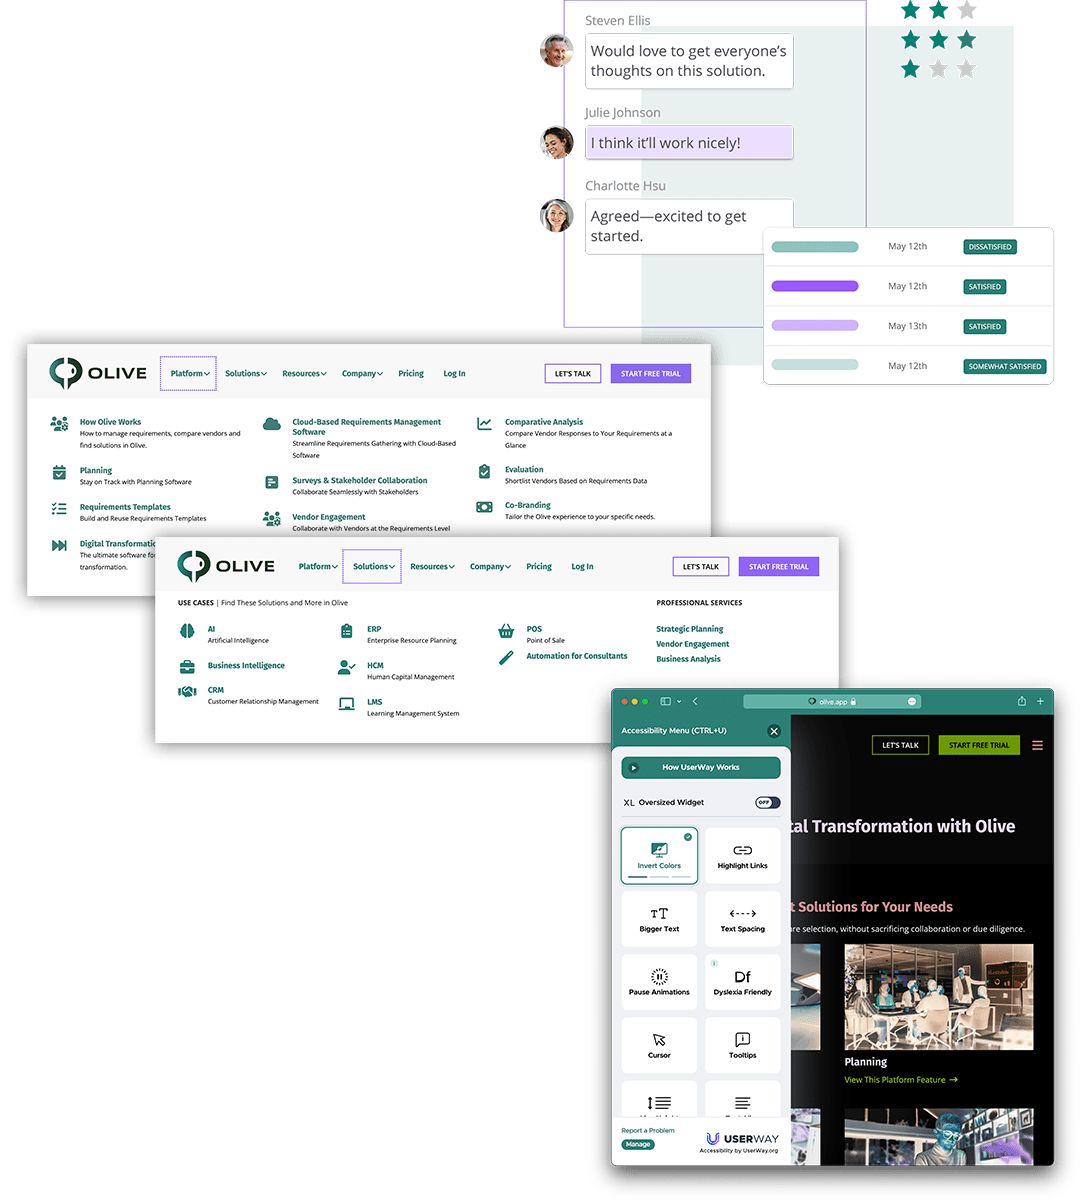 Design elements from Olive's new site: Collage-style illustrations of Olive's platform UI, the Platform and Solutions mega menus, and an example of UserWay being used to increase contrast on the site